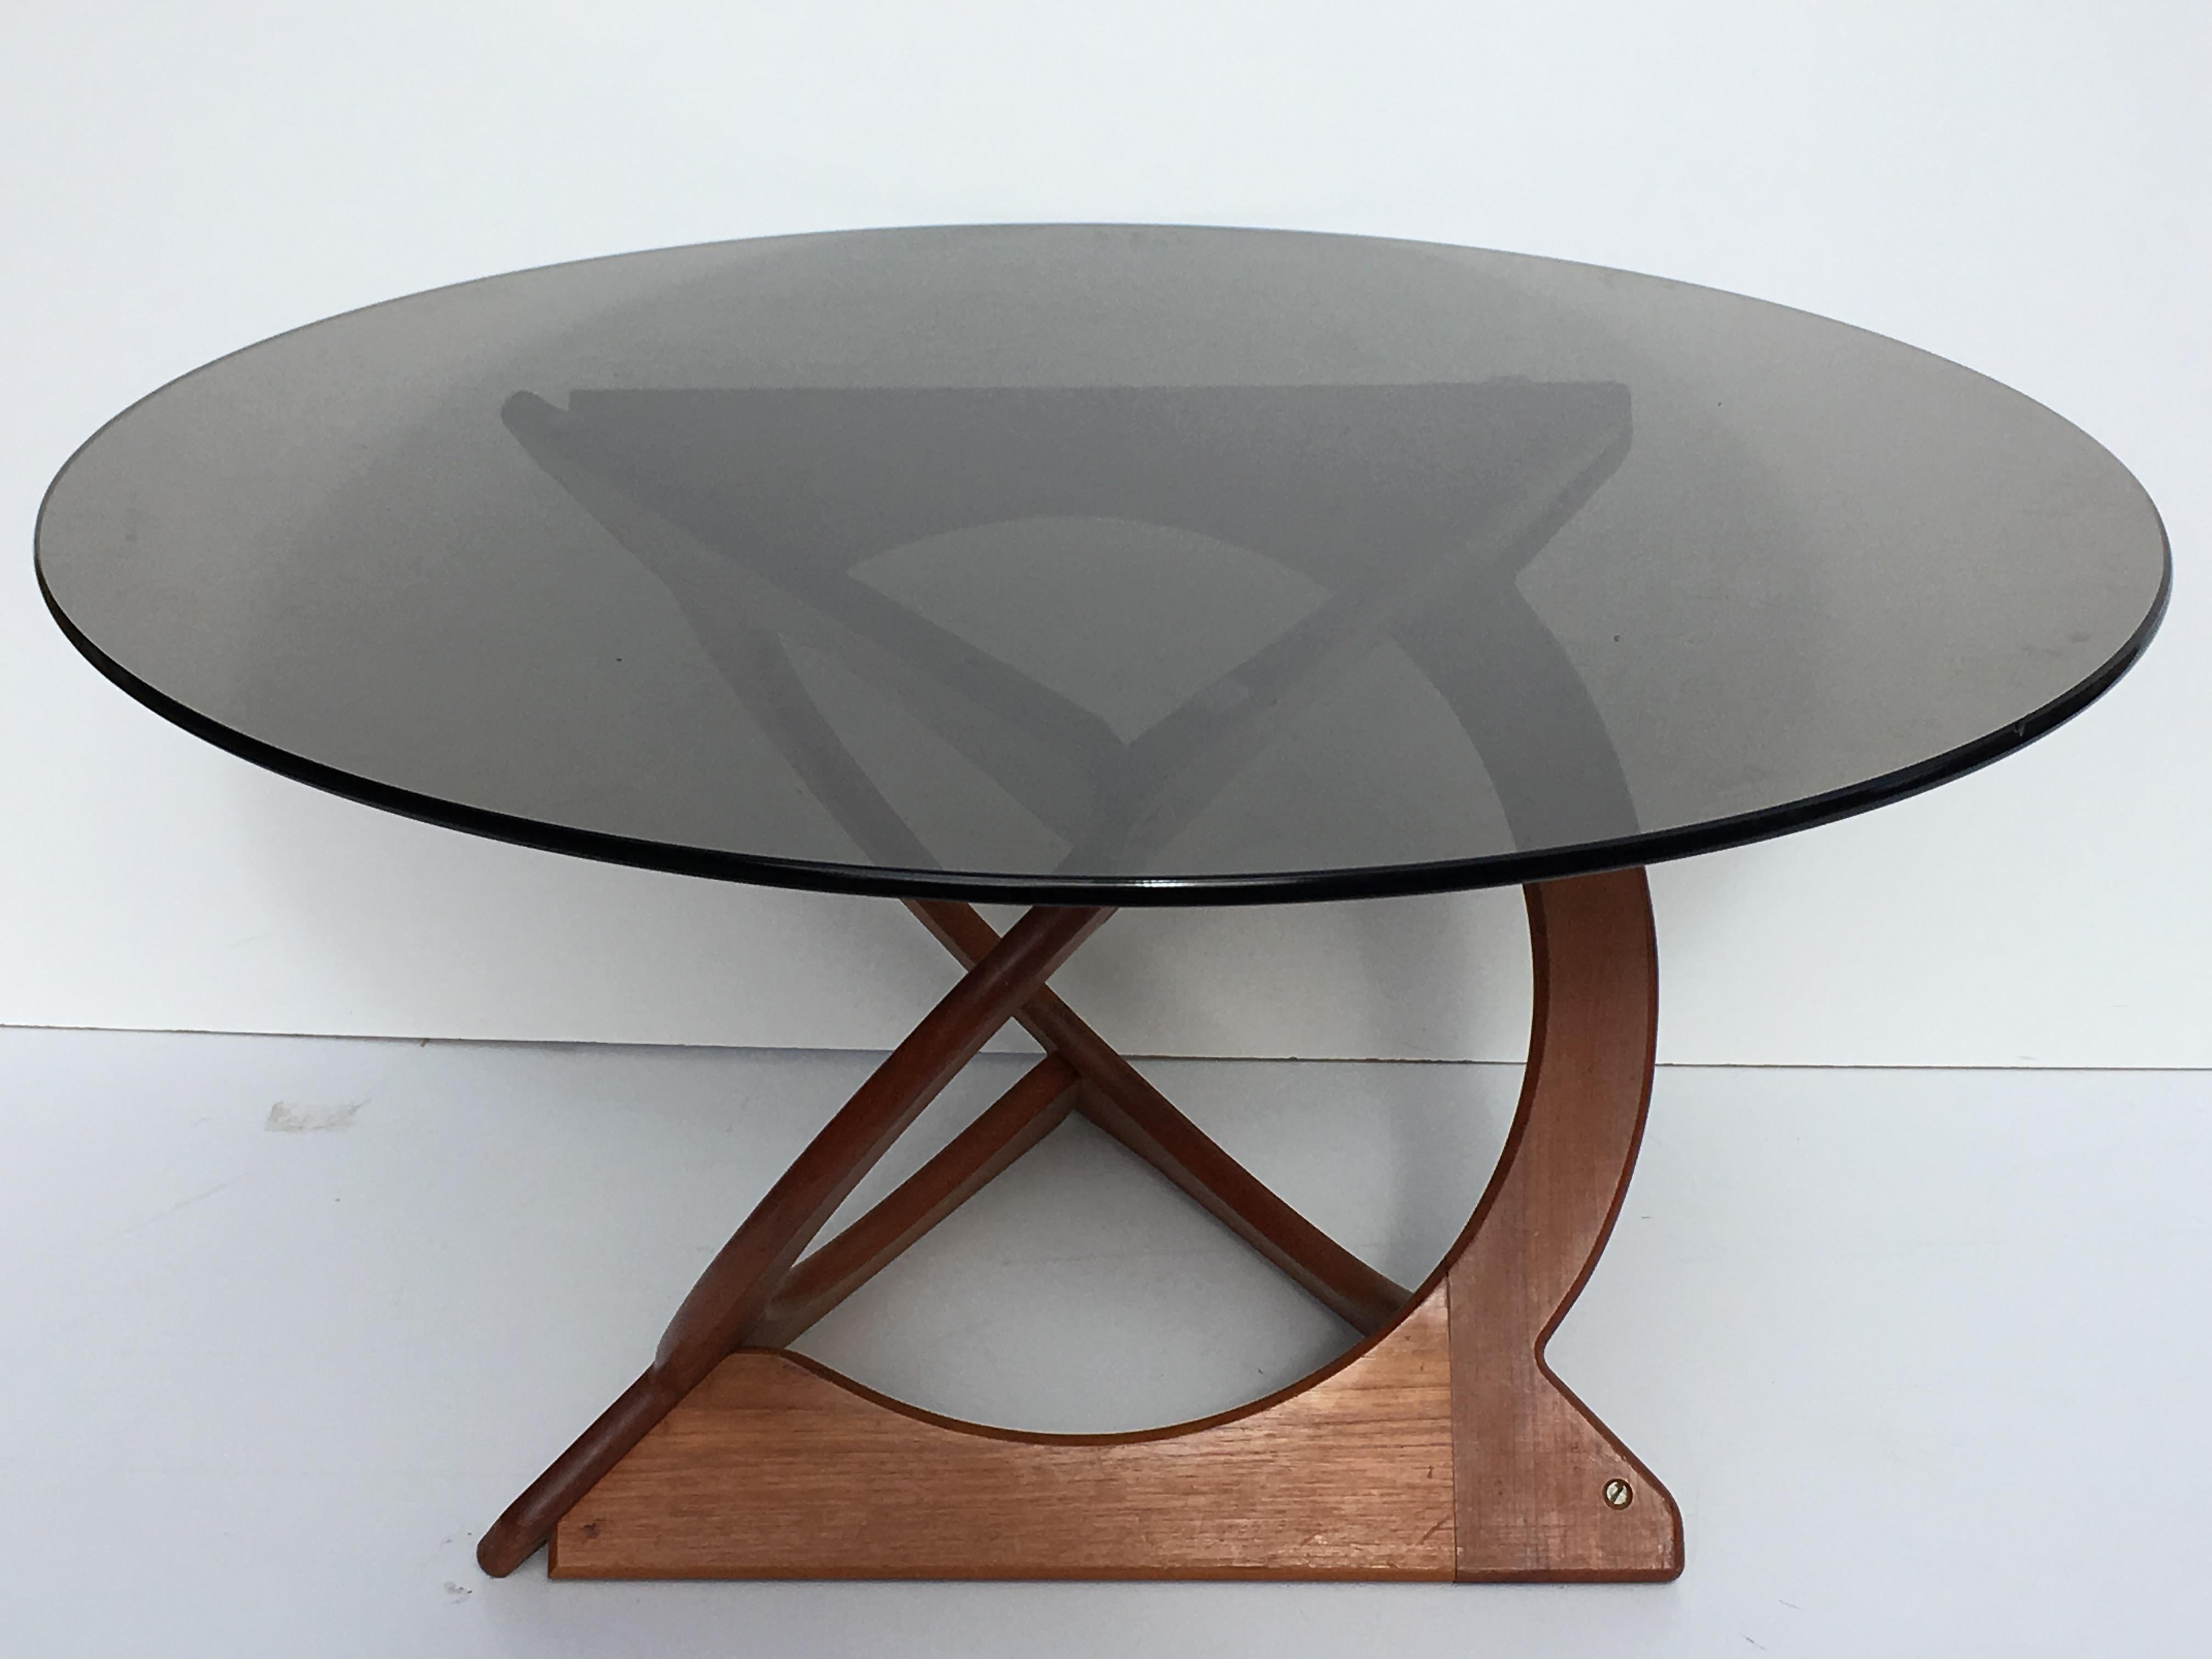 Danish teak and glass coffee table by Georg Jensen, circa 1960s. Incredible original condition.